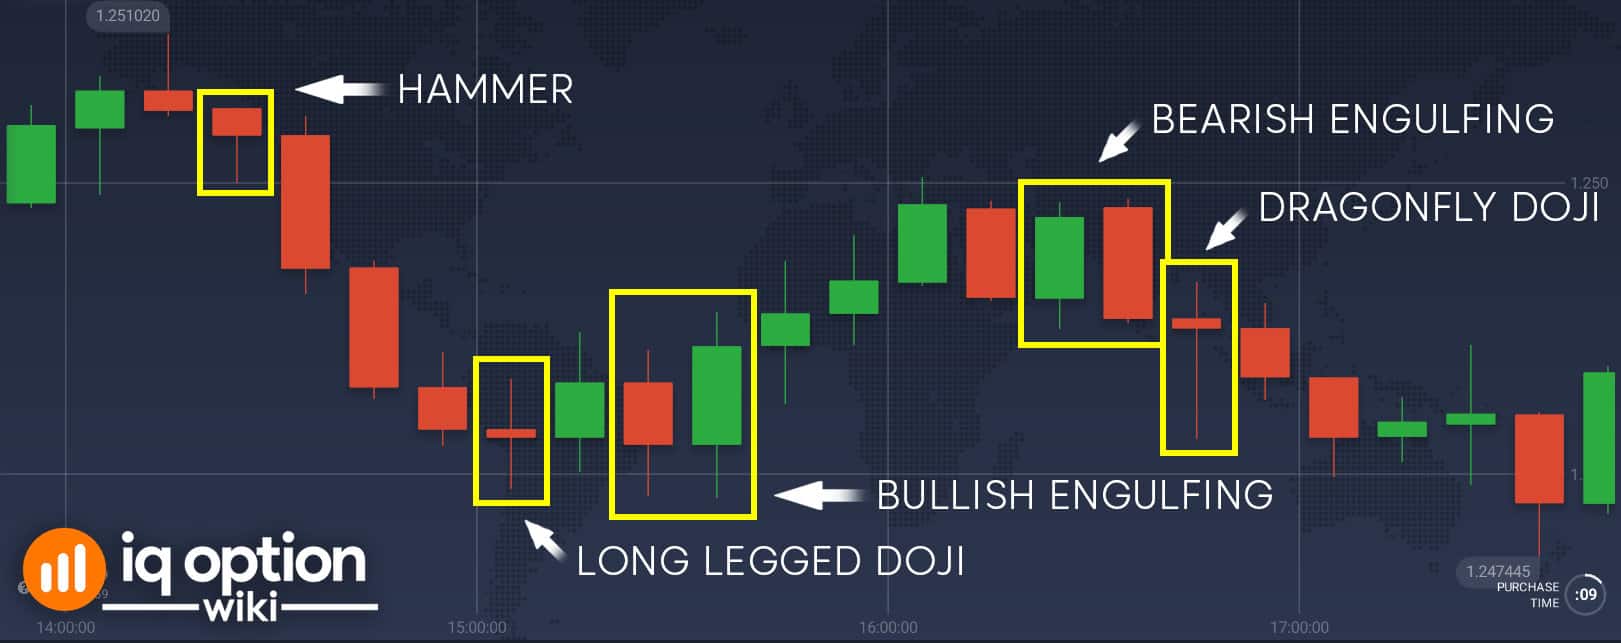 Figure 2 - Candlestick Patterns: Common candlestick patterns like doji, hammer, and engulfing provide insights into potential price movements.